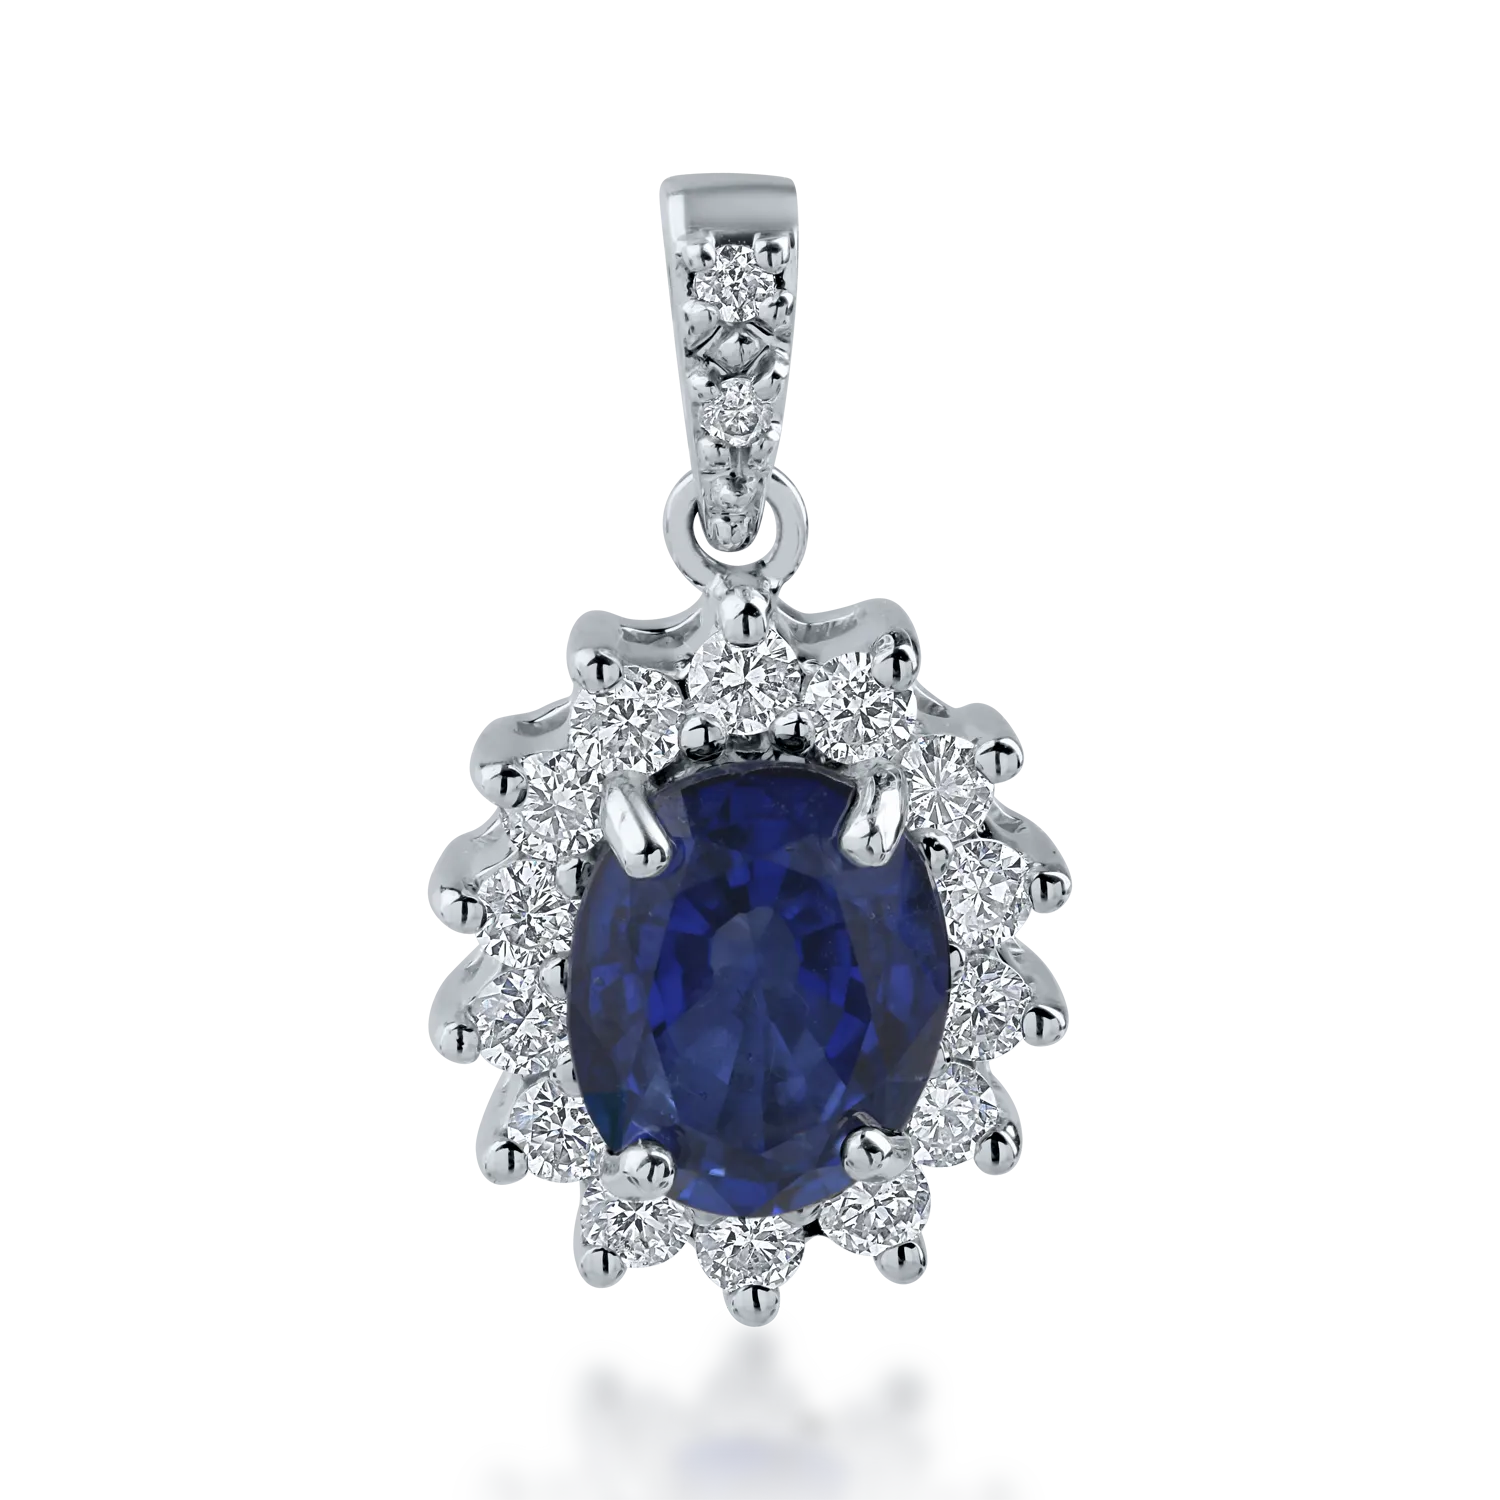 White gold pendant with 1.41ct heated sapphire and 0.32ct diamonds